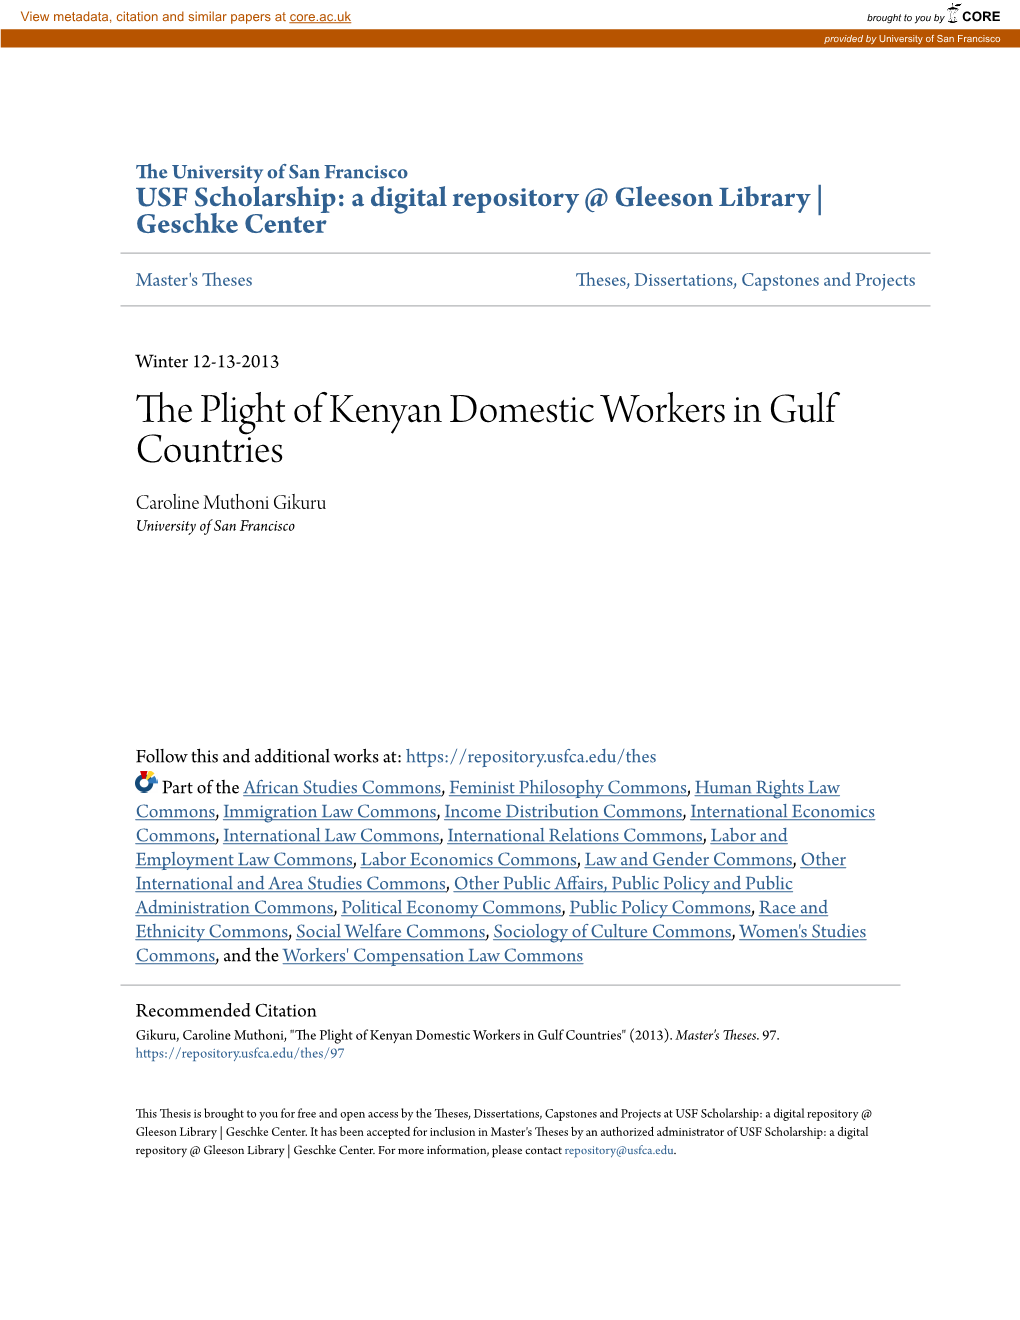 The Plight of Kenyan Domestic Workers in Gulf Countries